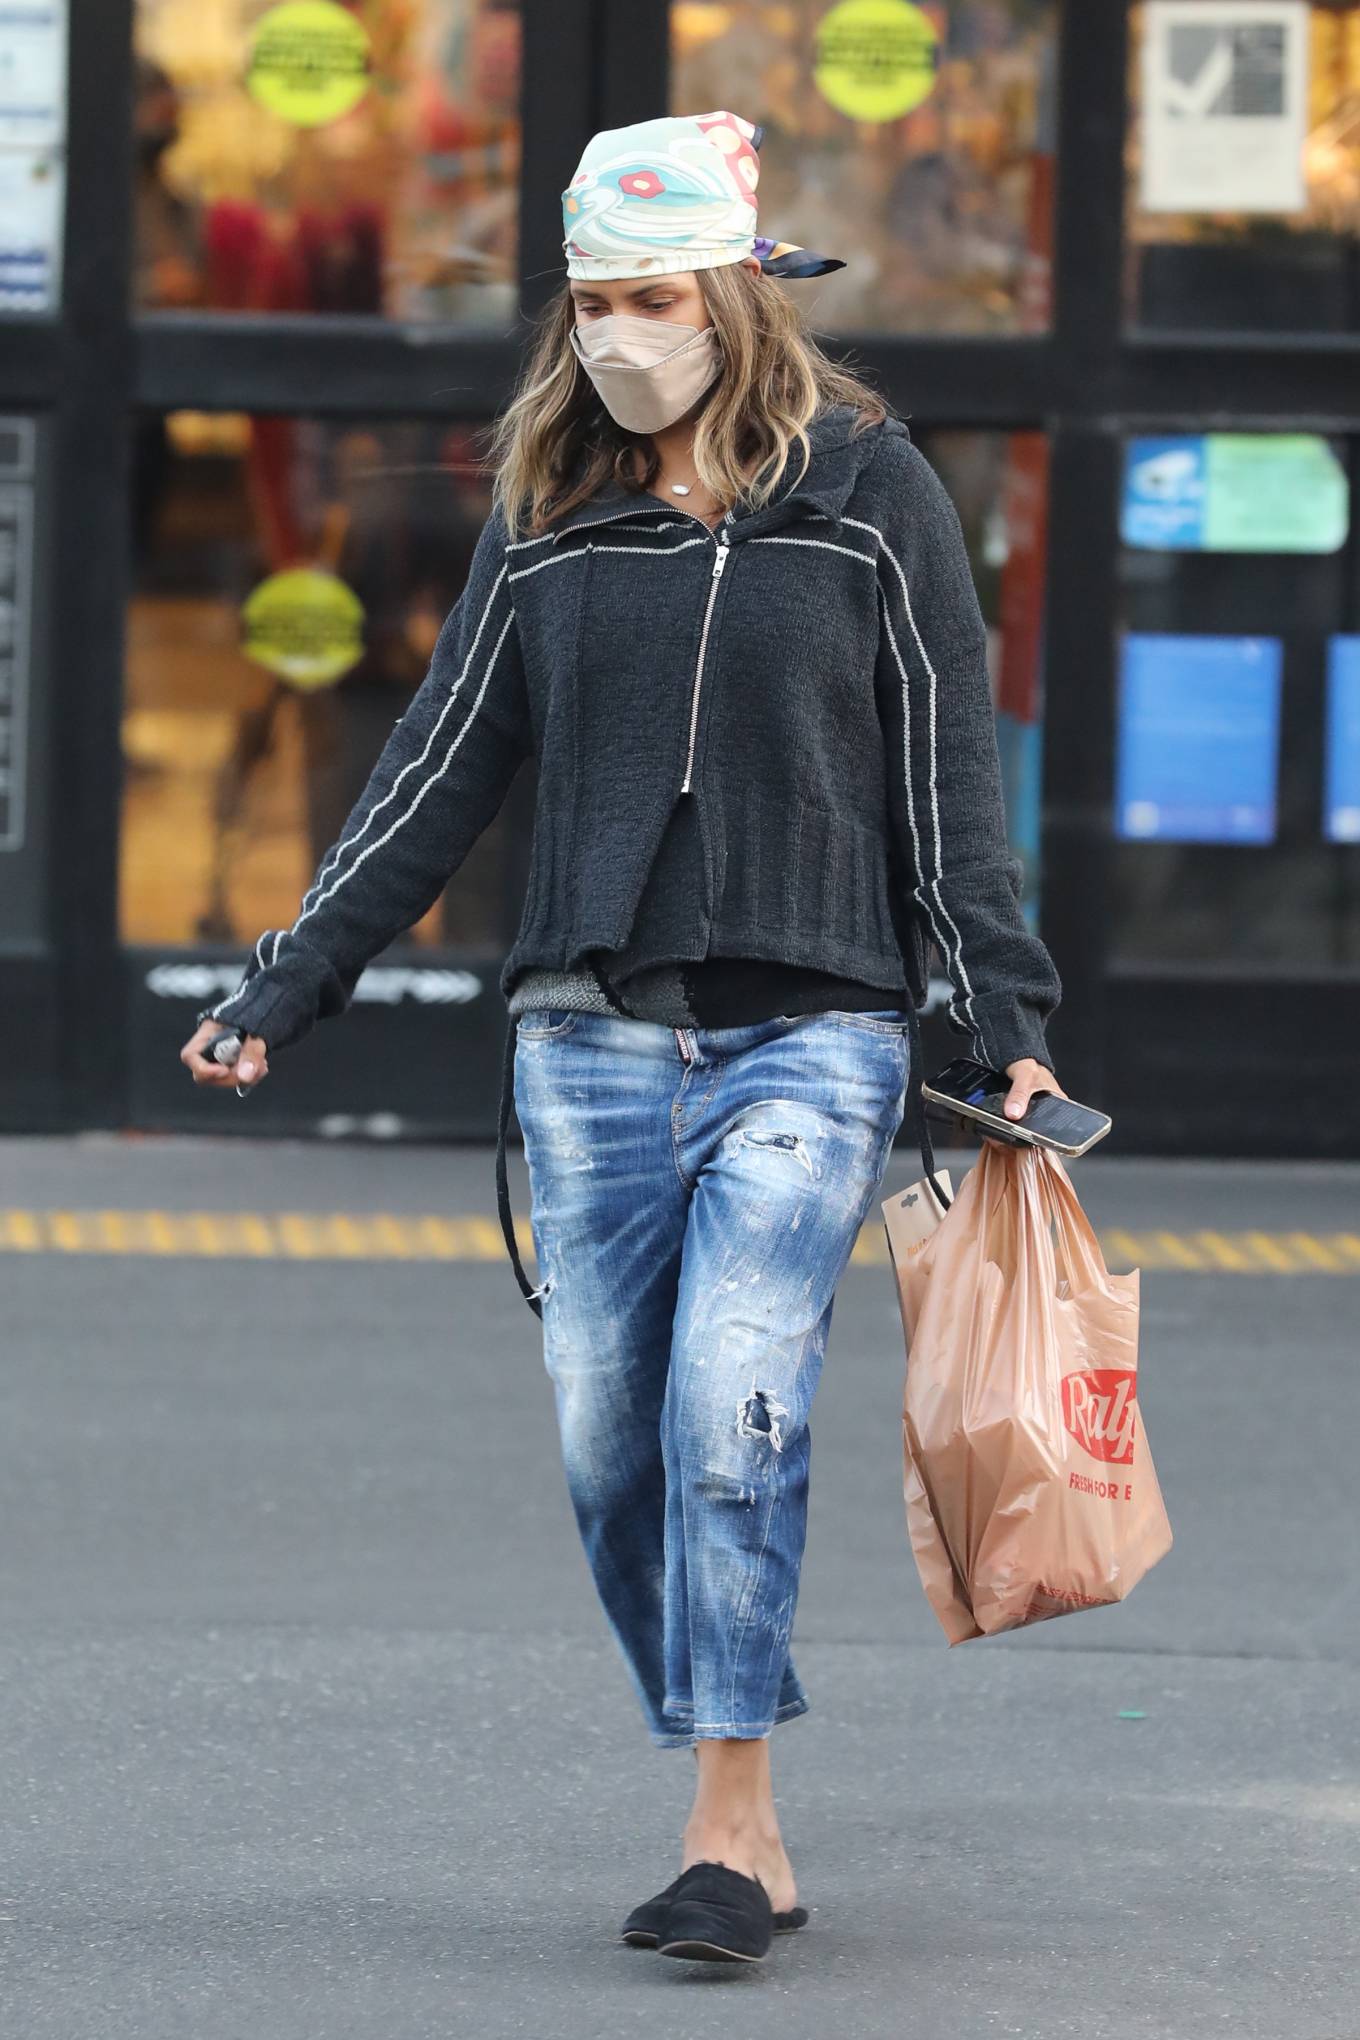 Halle Berry 2022 : Halle Berry – Shopping candids at Ralphs in Beverly Hills-04